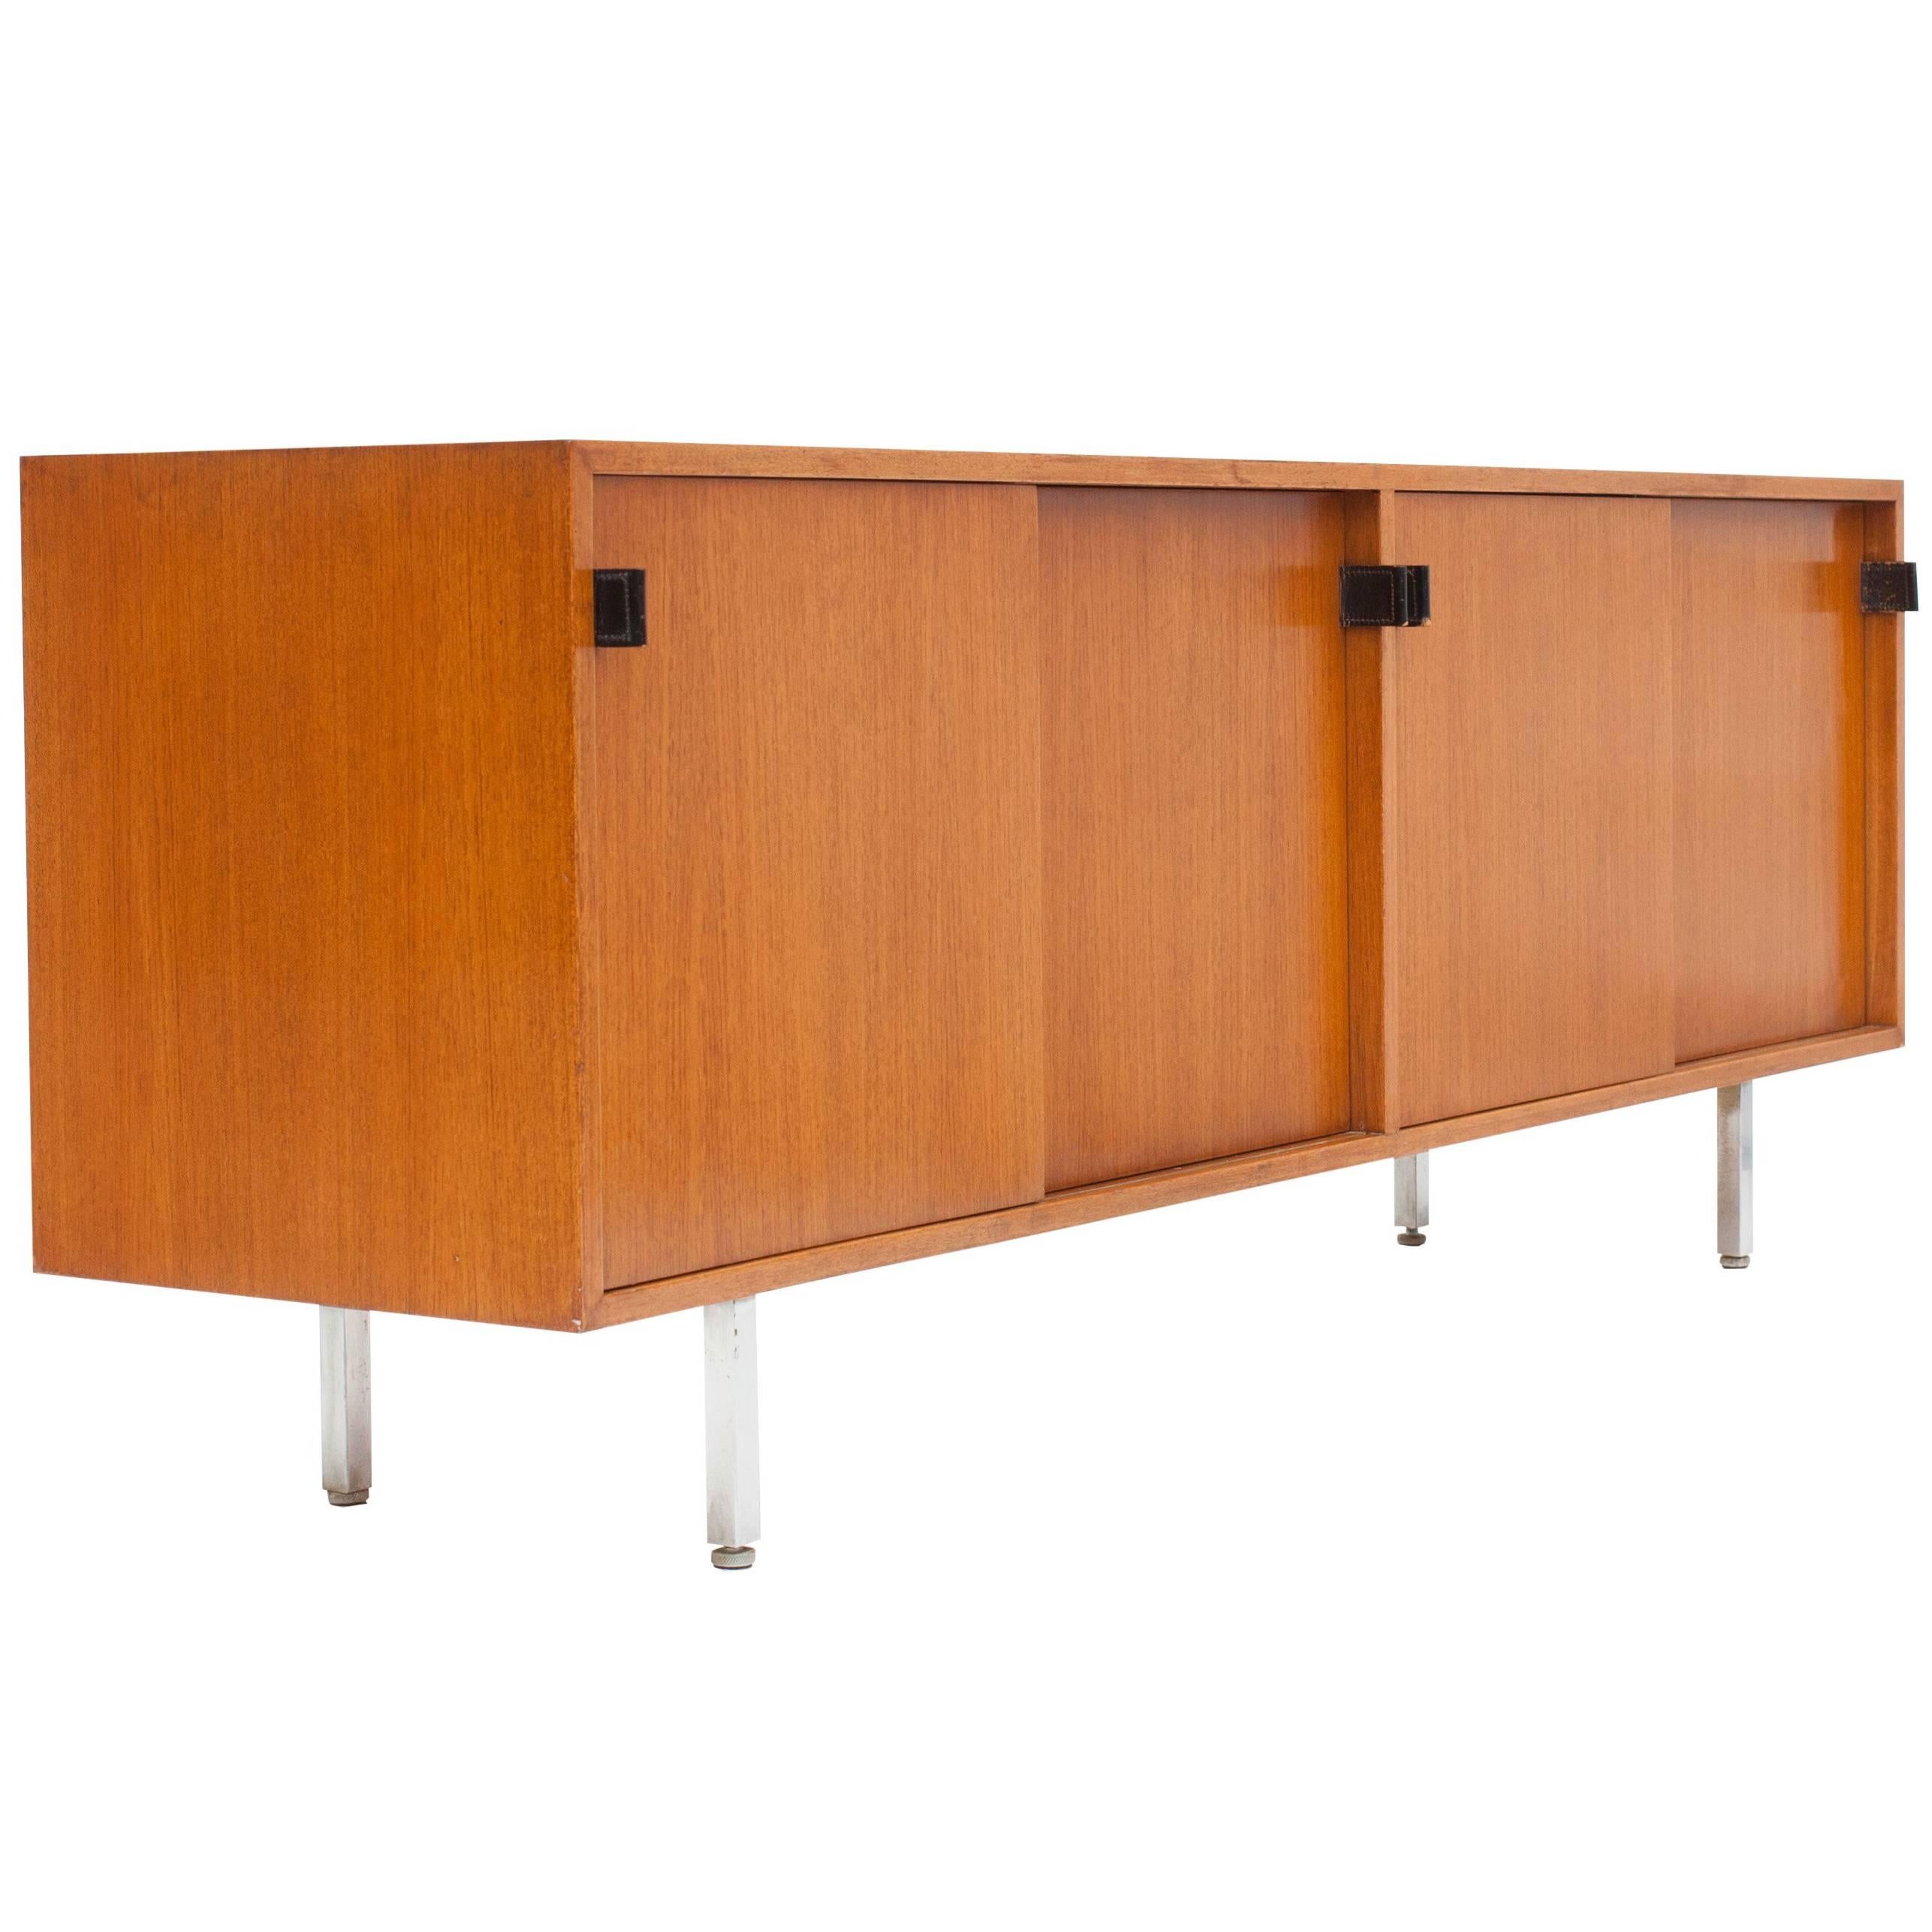 American Florence Knoll Credenza in Teak, Manufactured by De Coene, 1950s